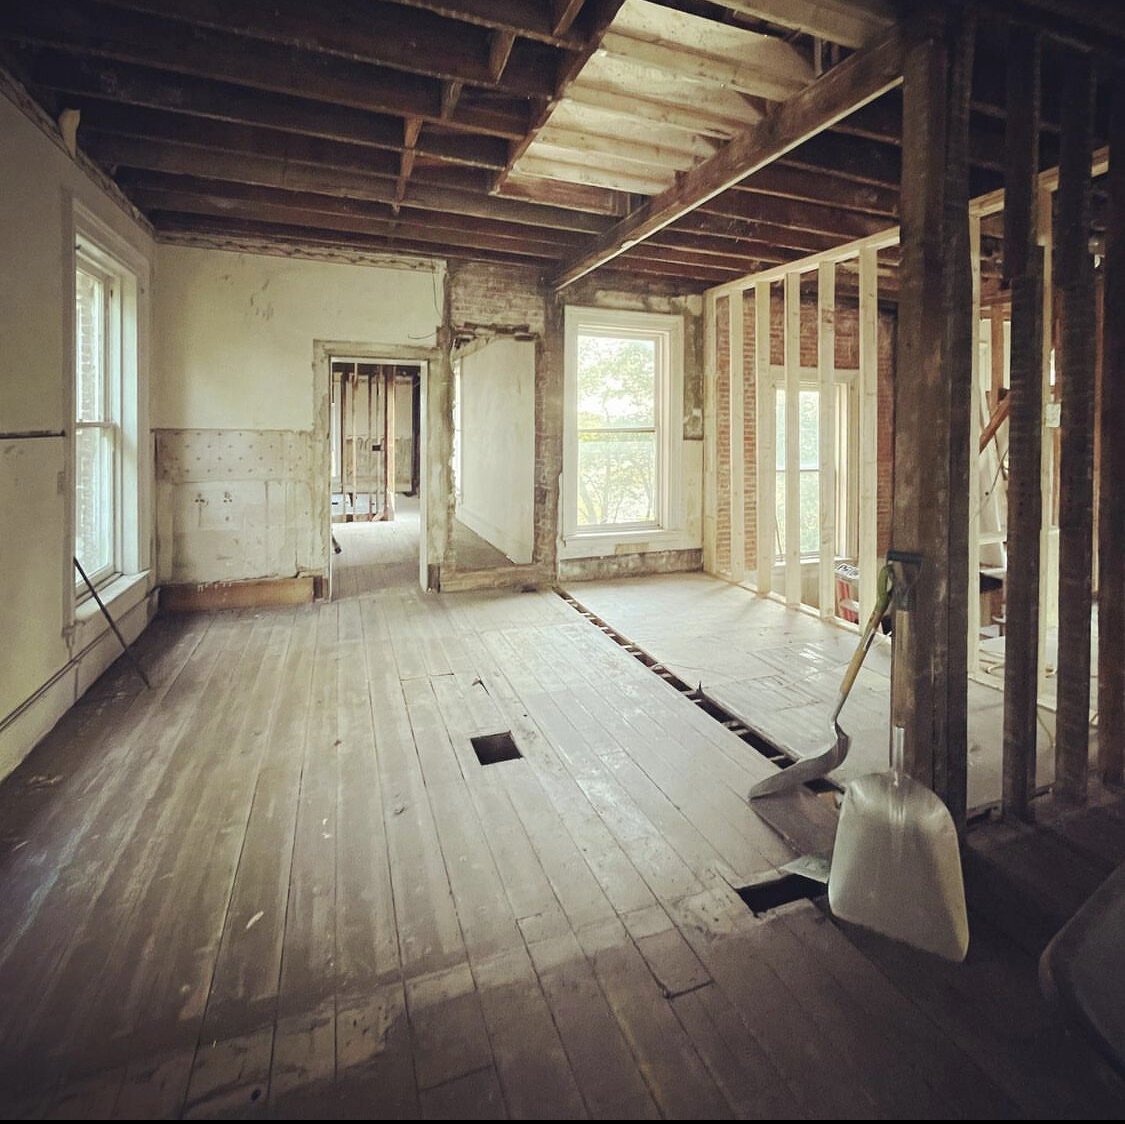 The interior of the Bain's home during renovation.